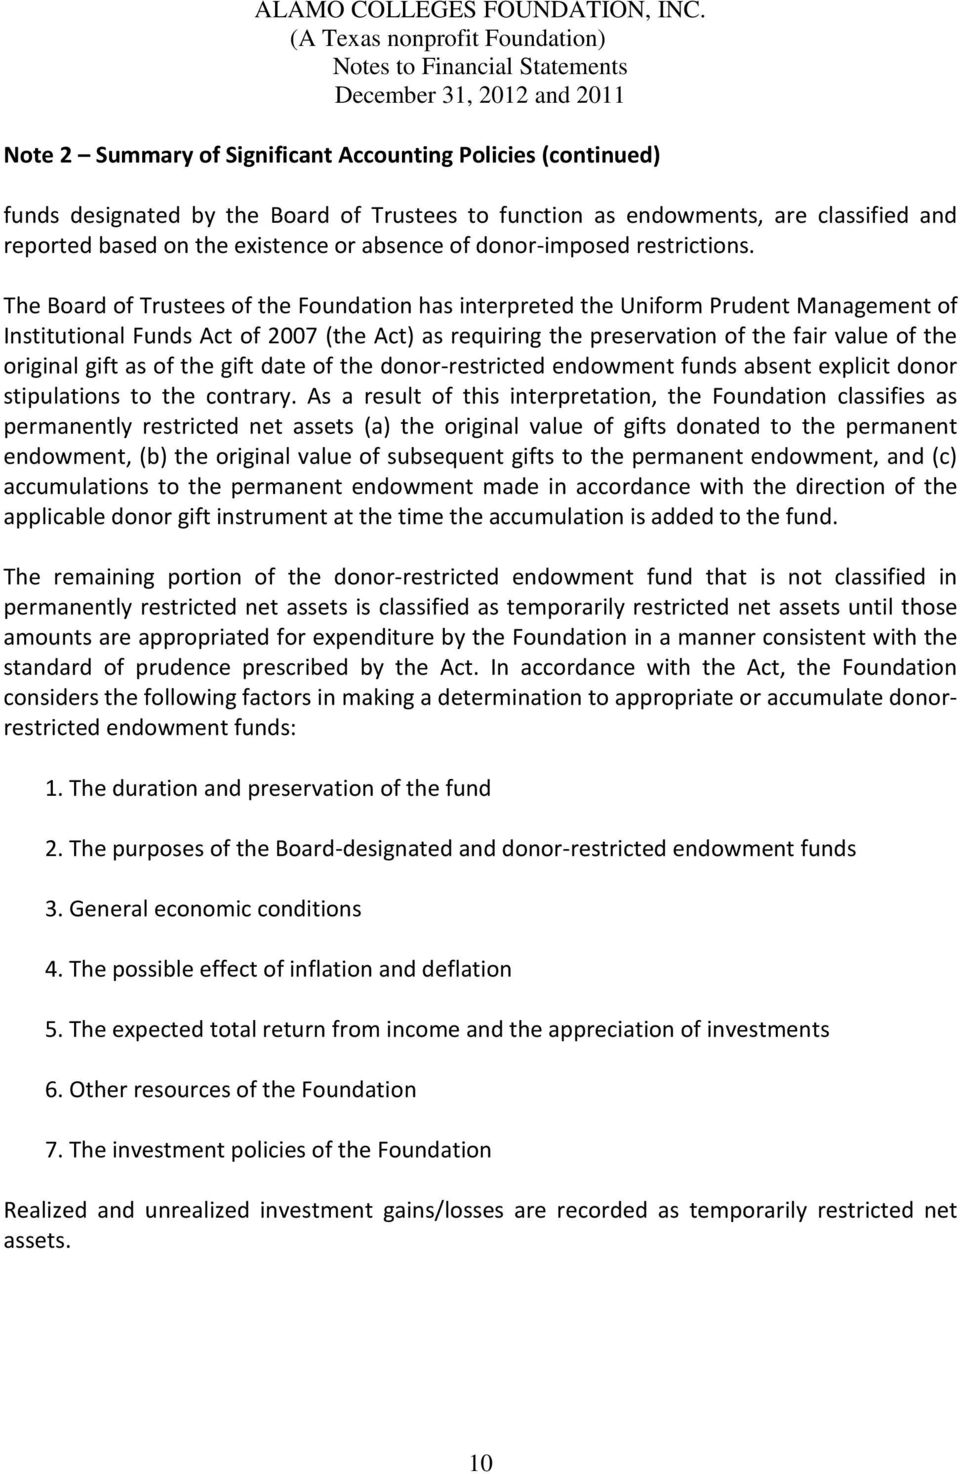 The Board of Trustees of the Foundation has interpreted the Uniform Prudent Management of Institutional Funds Act of 2007 (the Act) as requiring the preservation of the fair value of the original